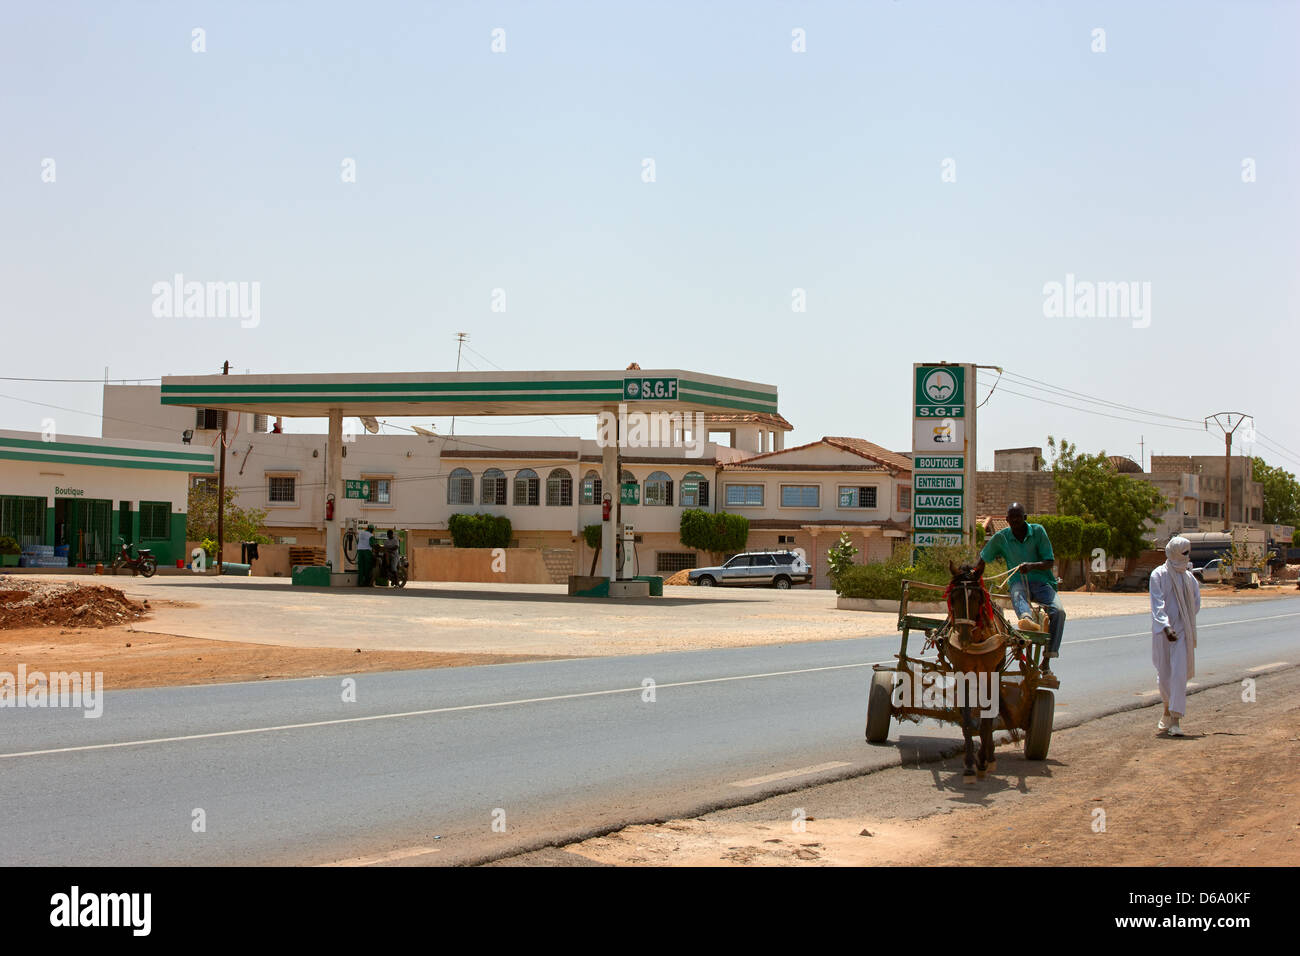 S.G.F Gas Station, Thies, Senegal, Africa Stock Photo